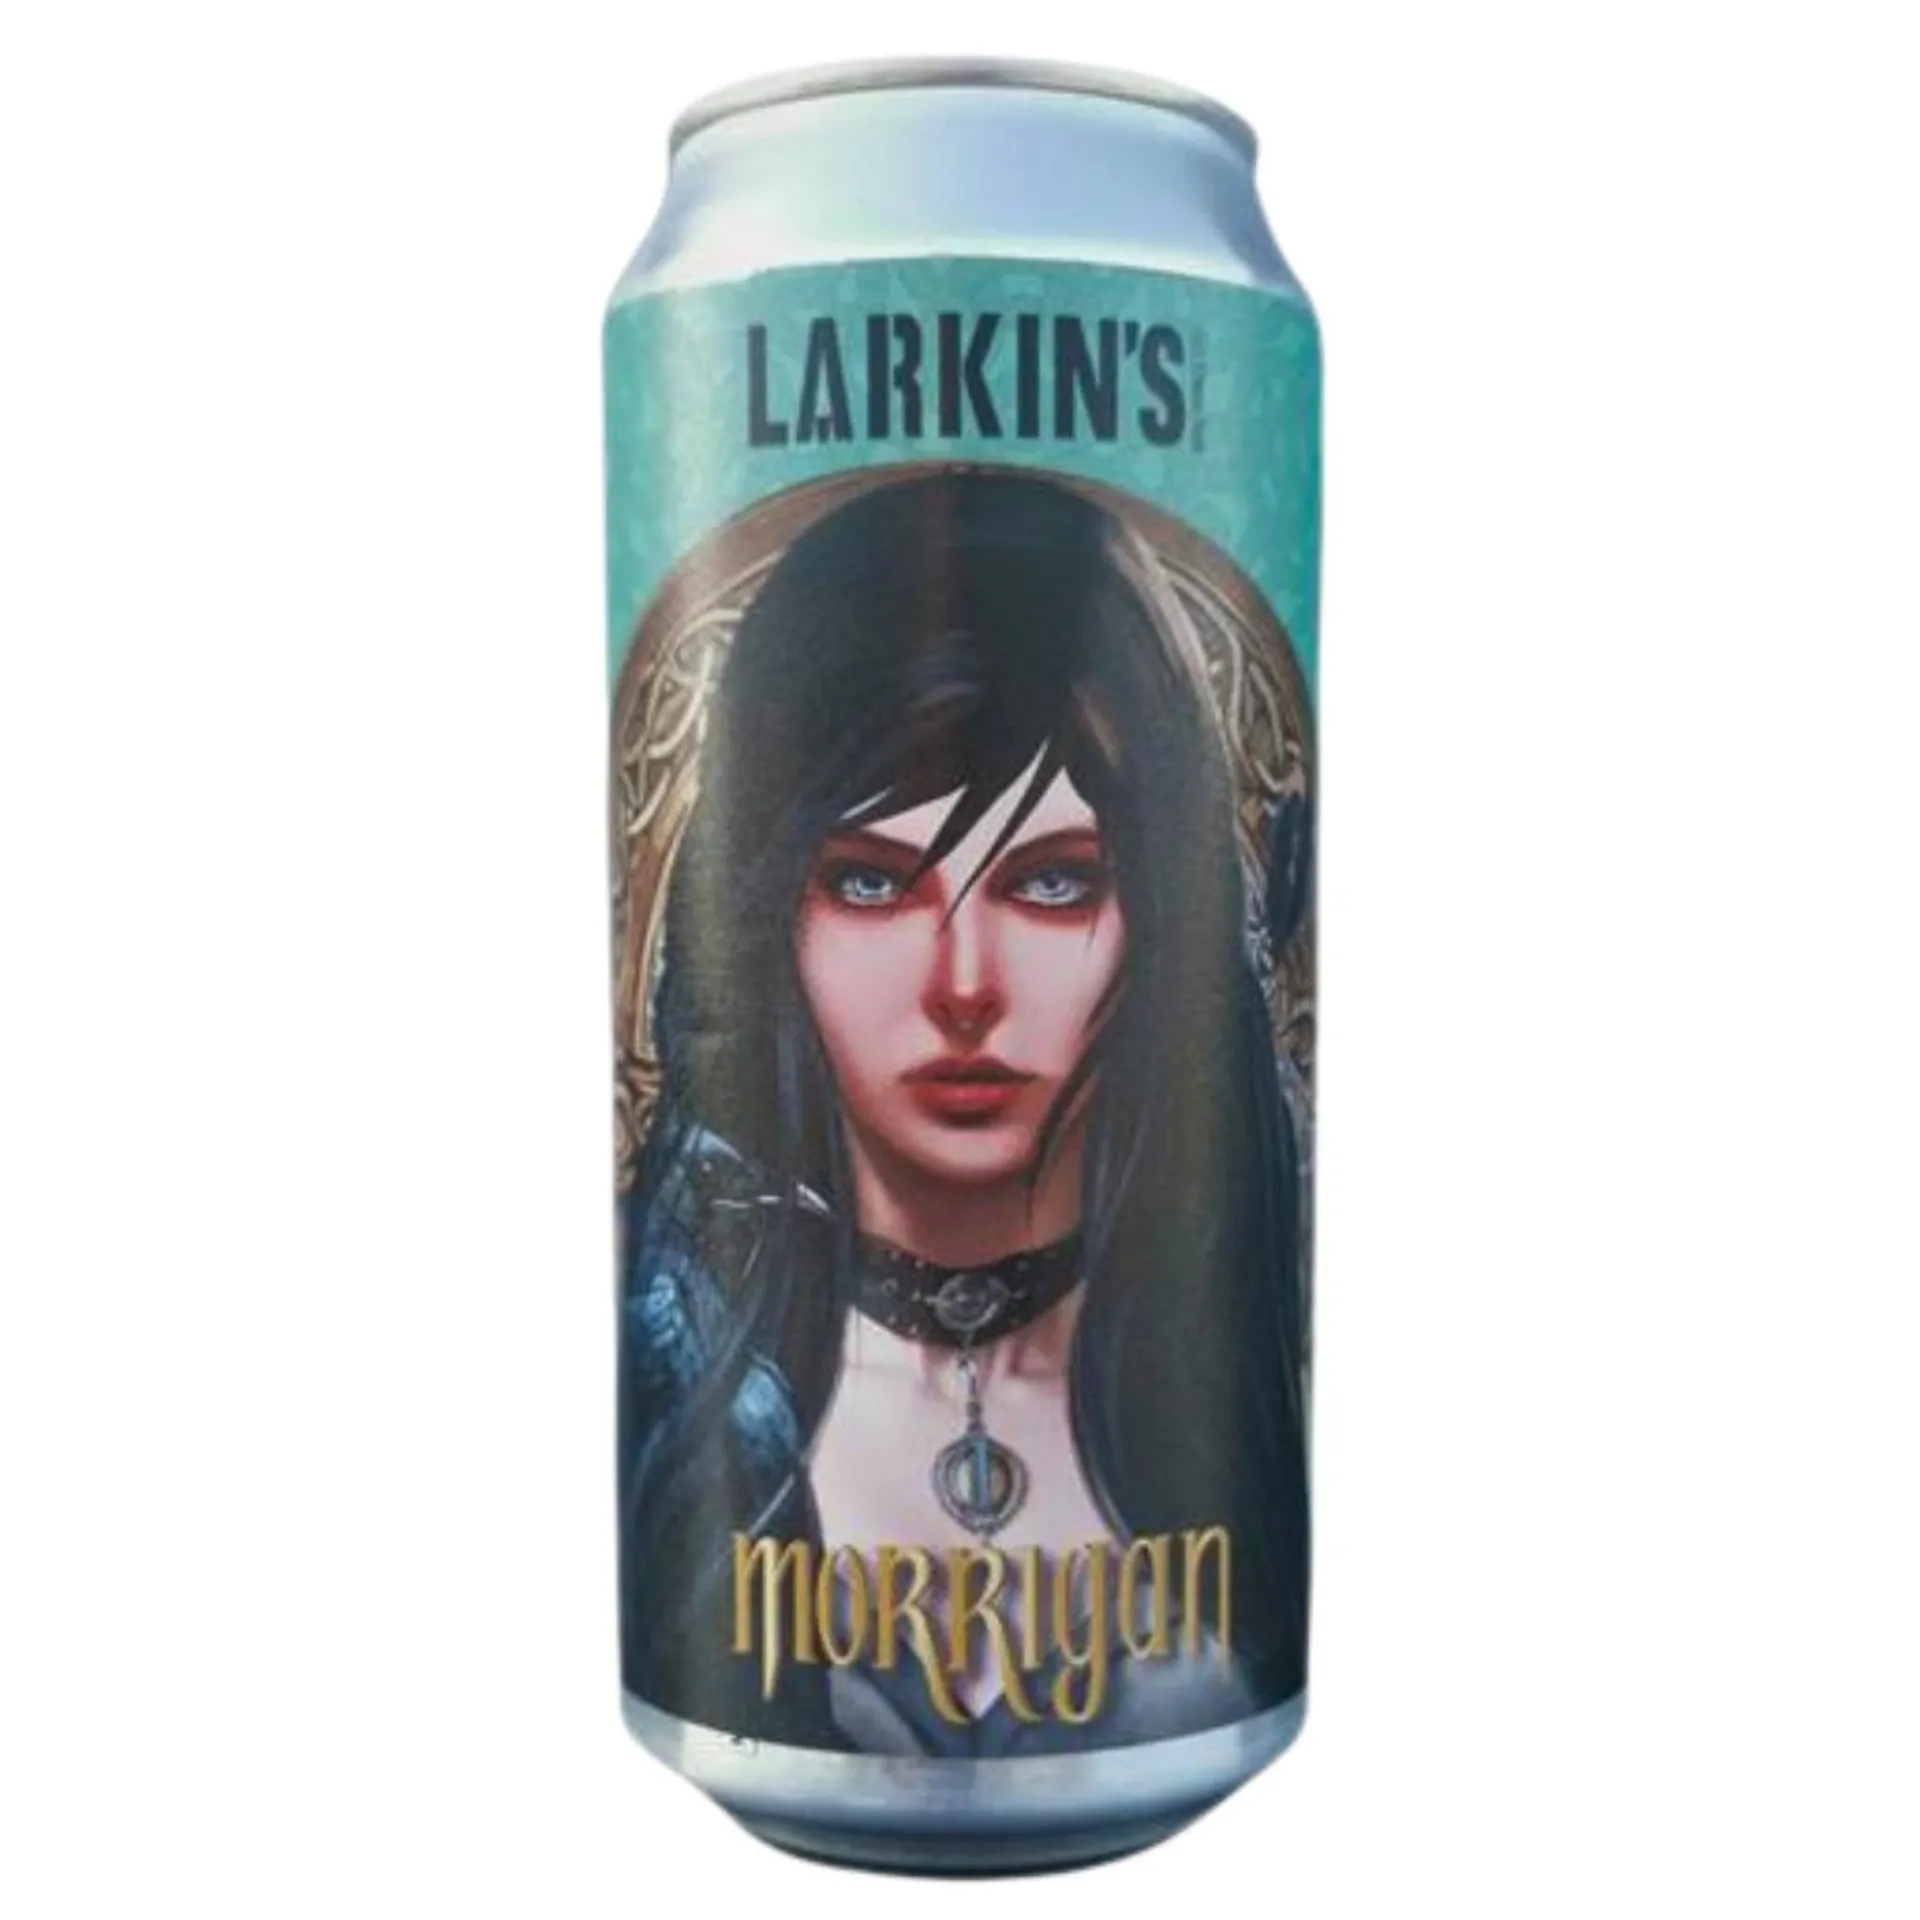 Larkin's- Morrigan '24 Imperial Stout 10% ABV 440ml Can